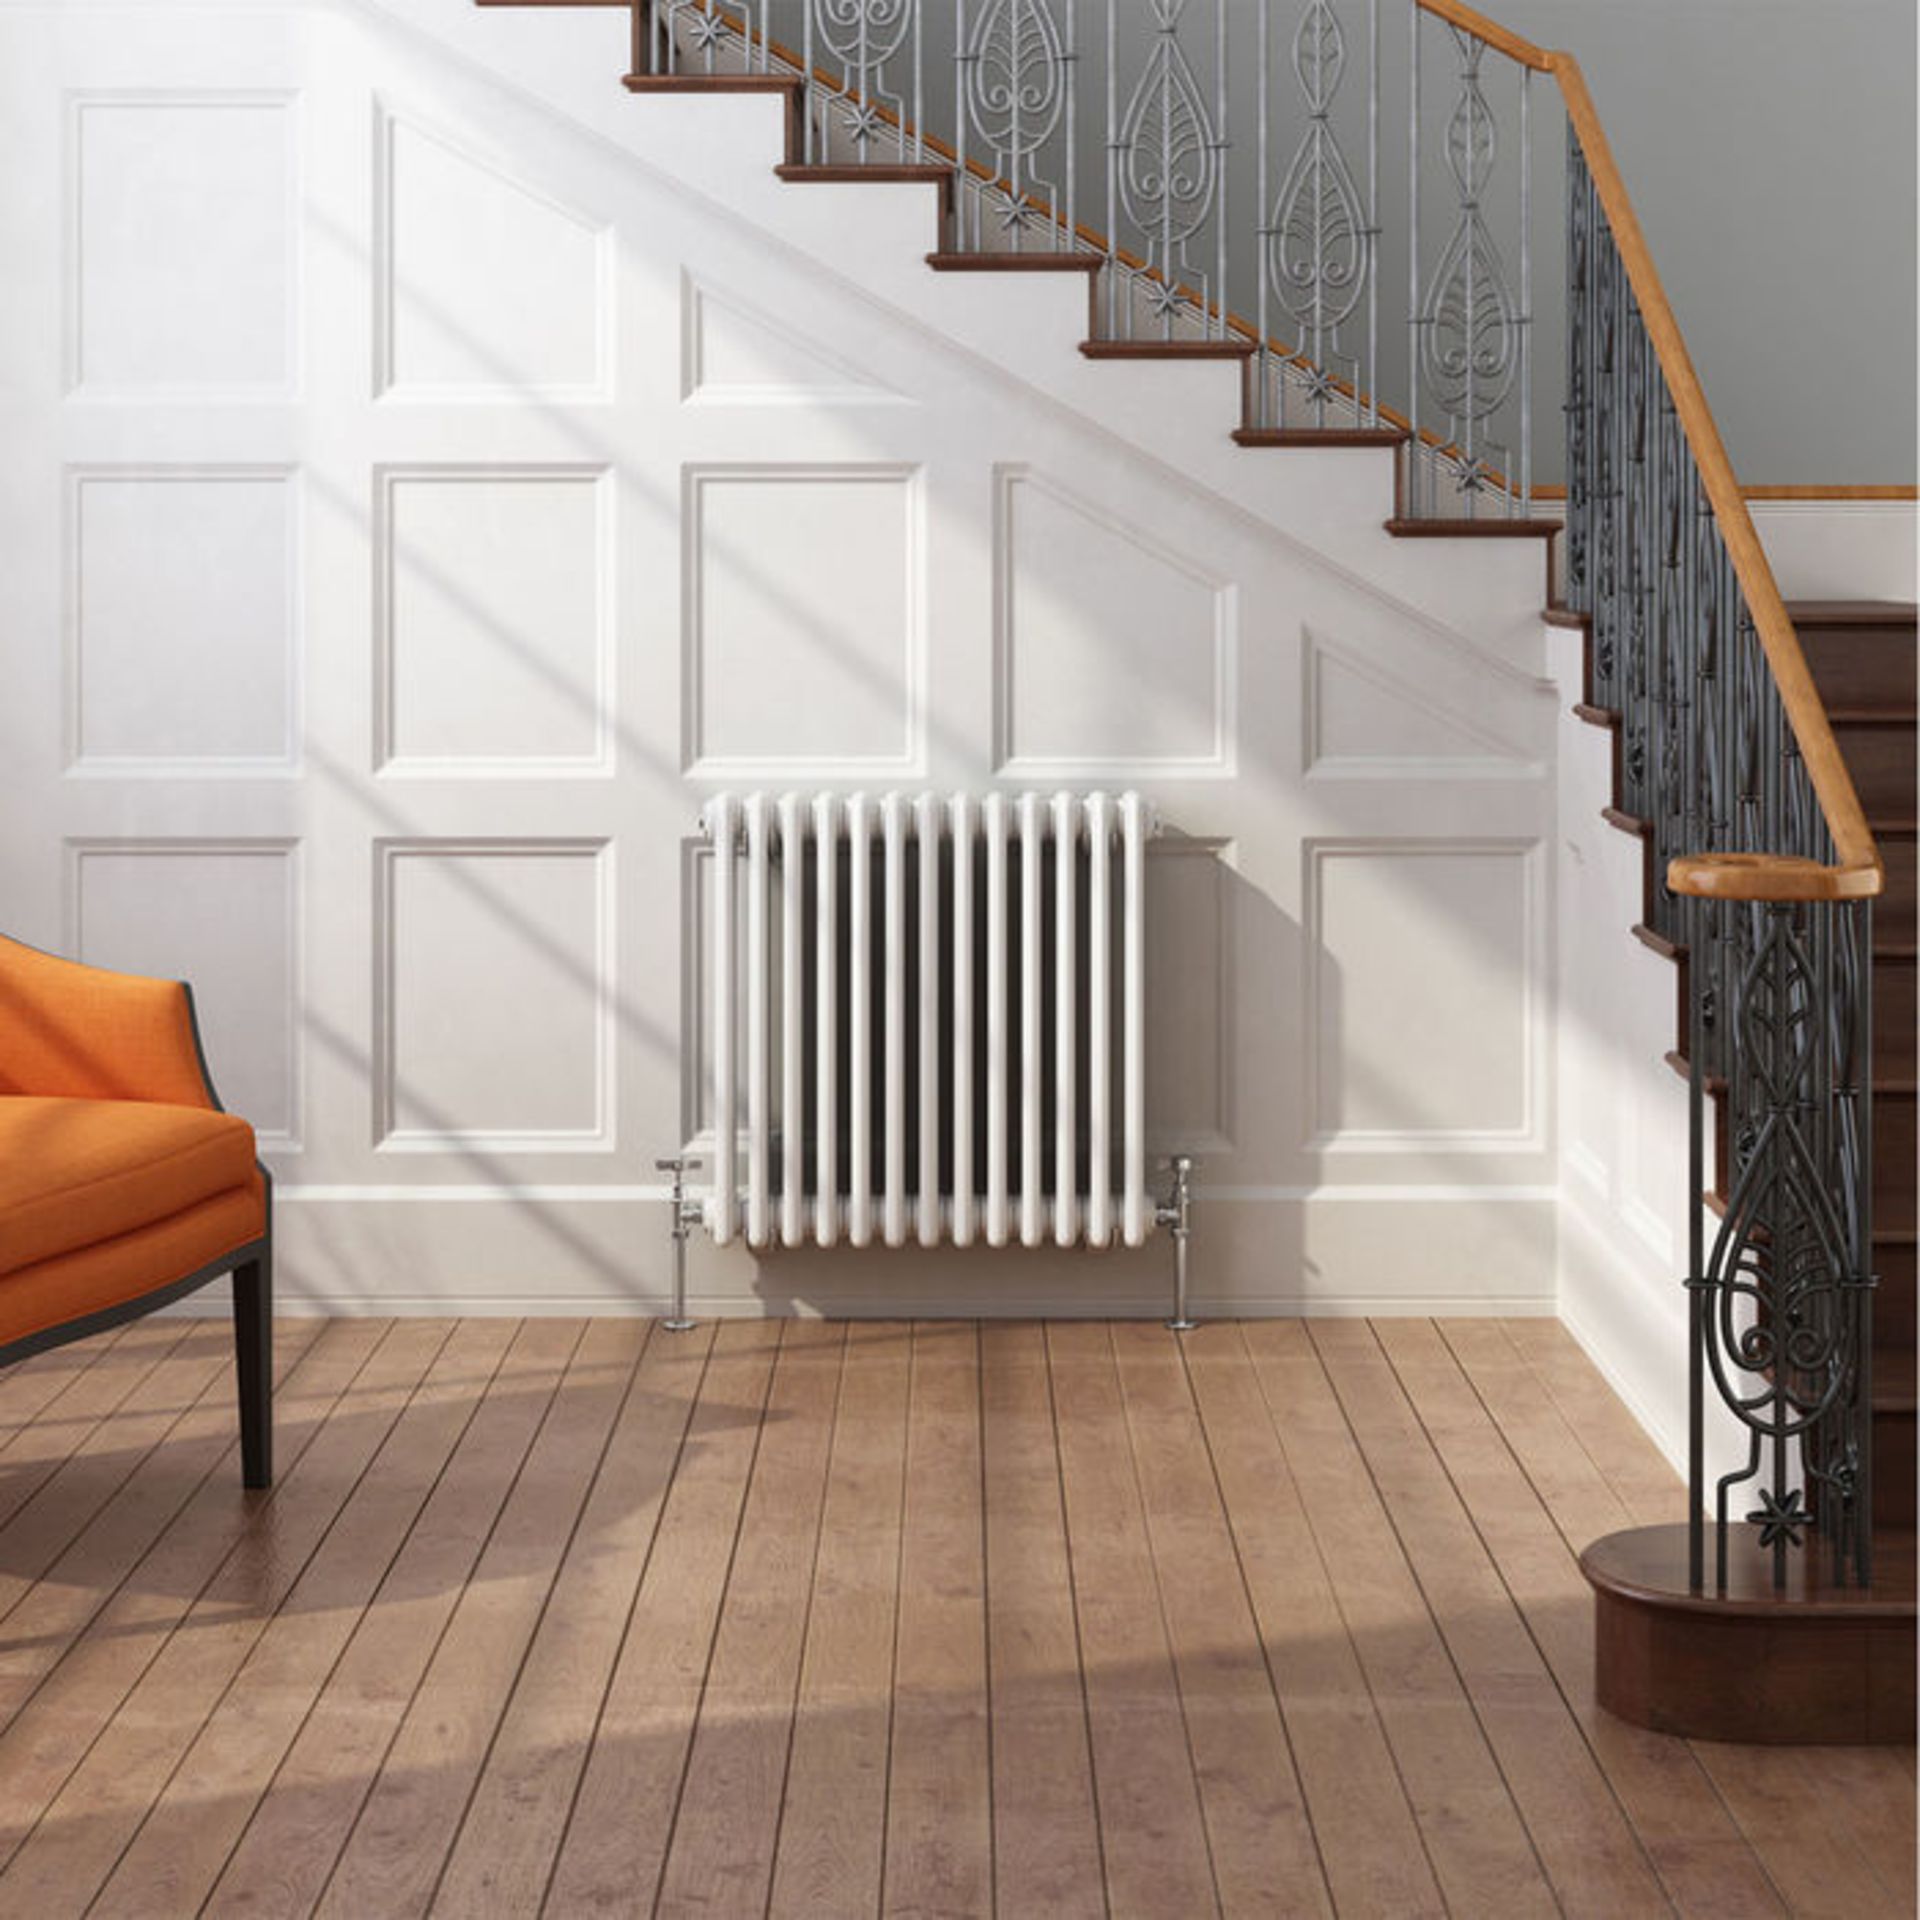 New (W117) 500x628mm White Double Panel Horizontal Colosseum Traditional Radiator. RRP £395.9... - Image 2 of 3